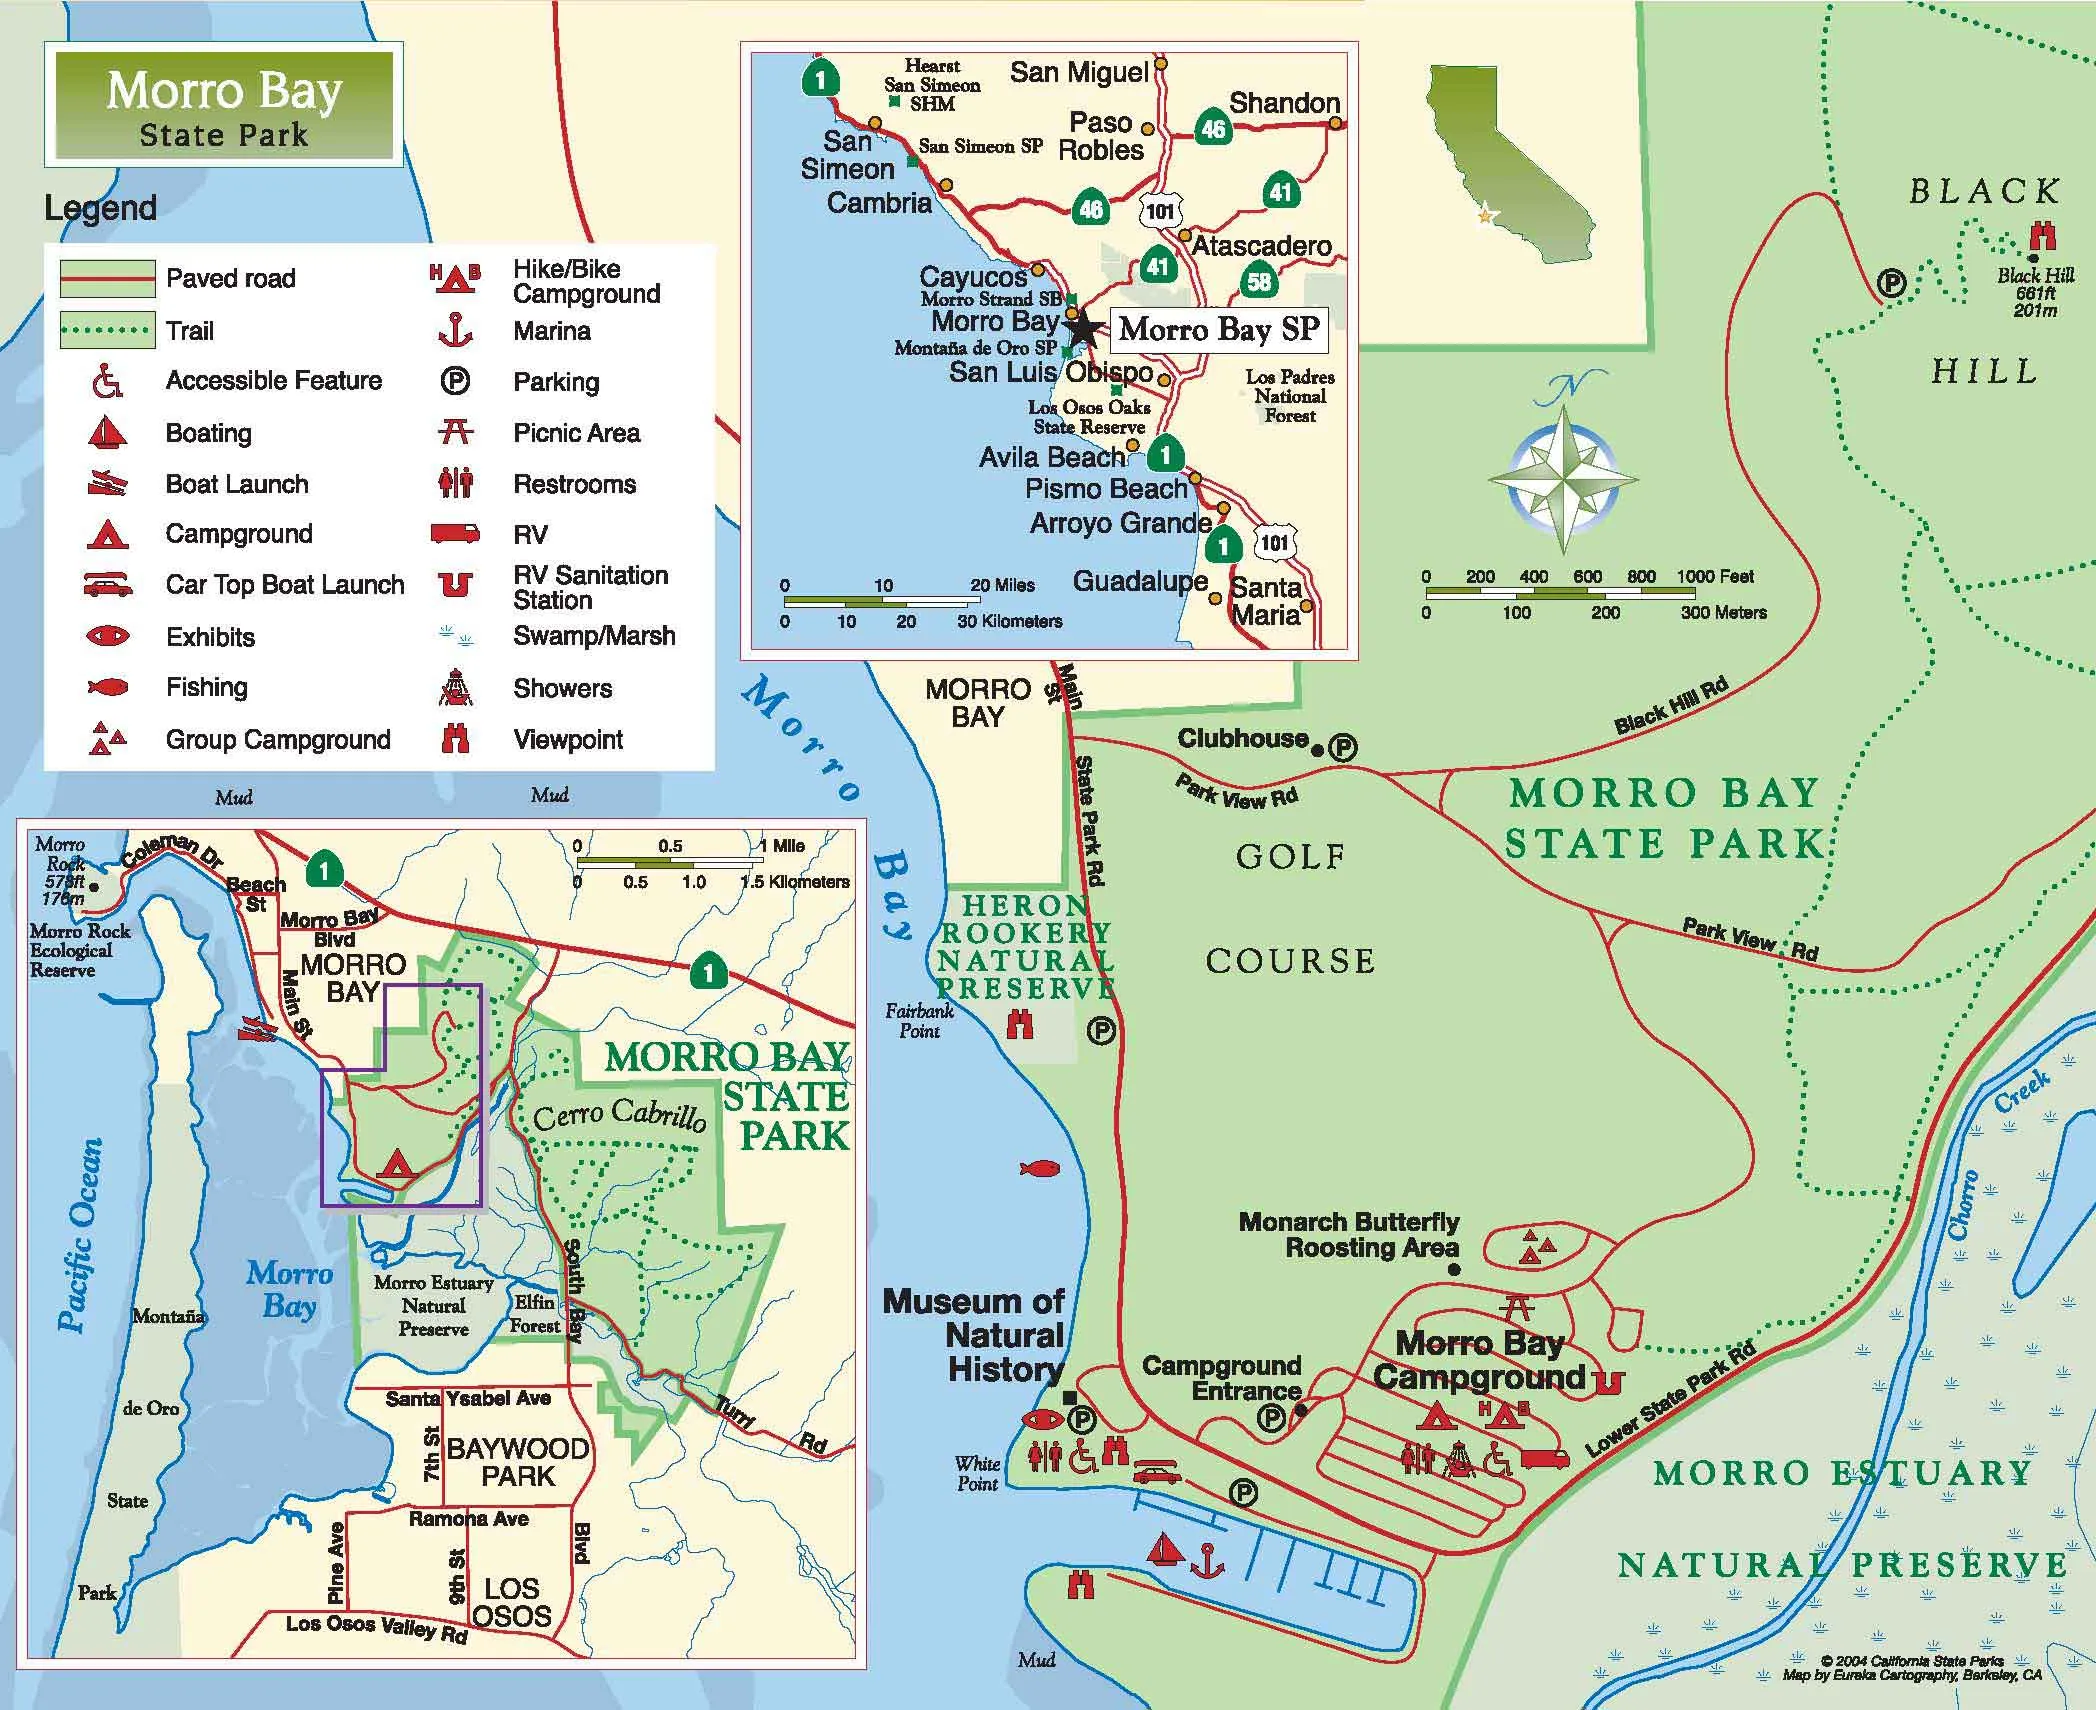 Morro Bay State Park Map.